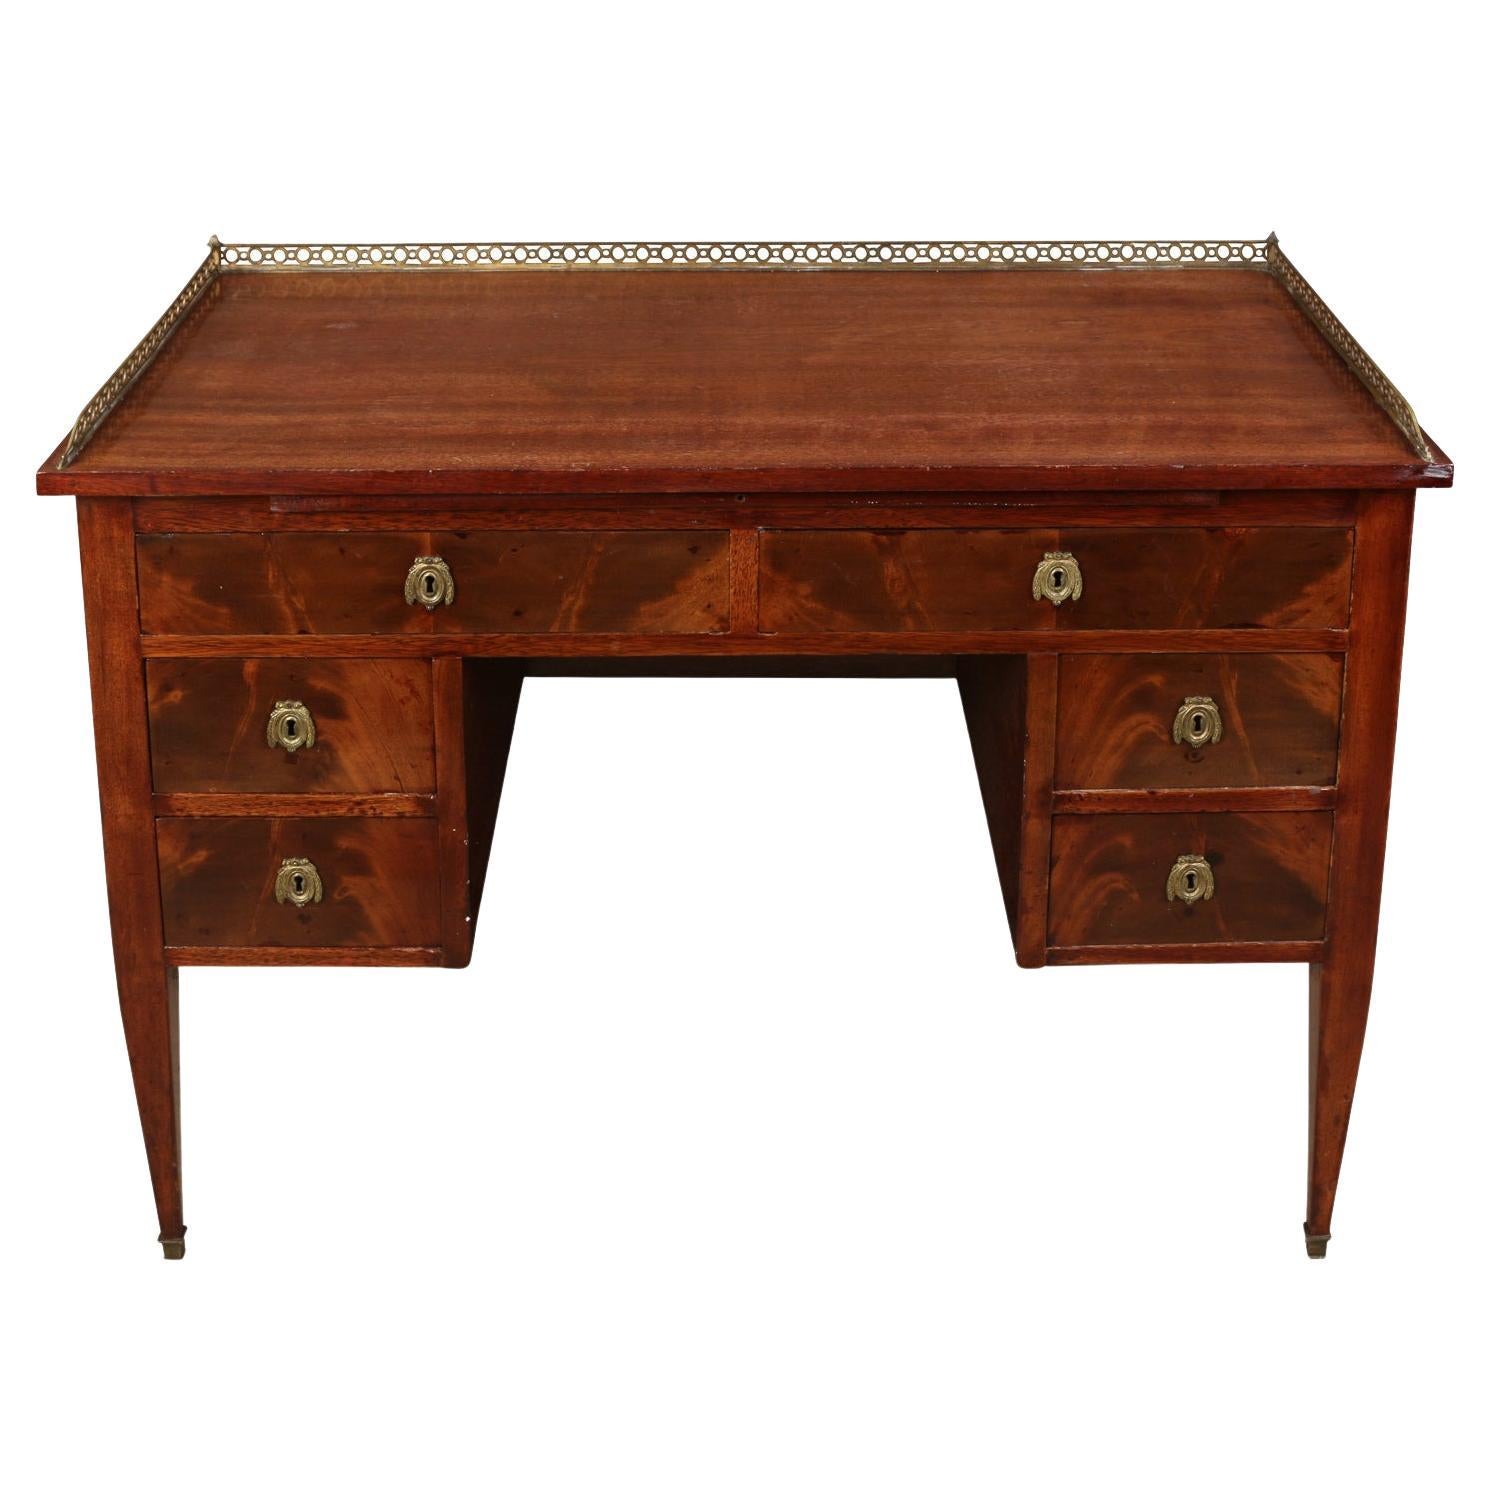 Antique Burled Wood Petite Desk with Brass Gallery Rail